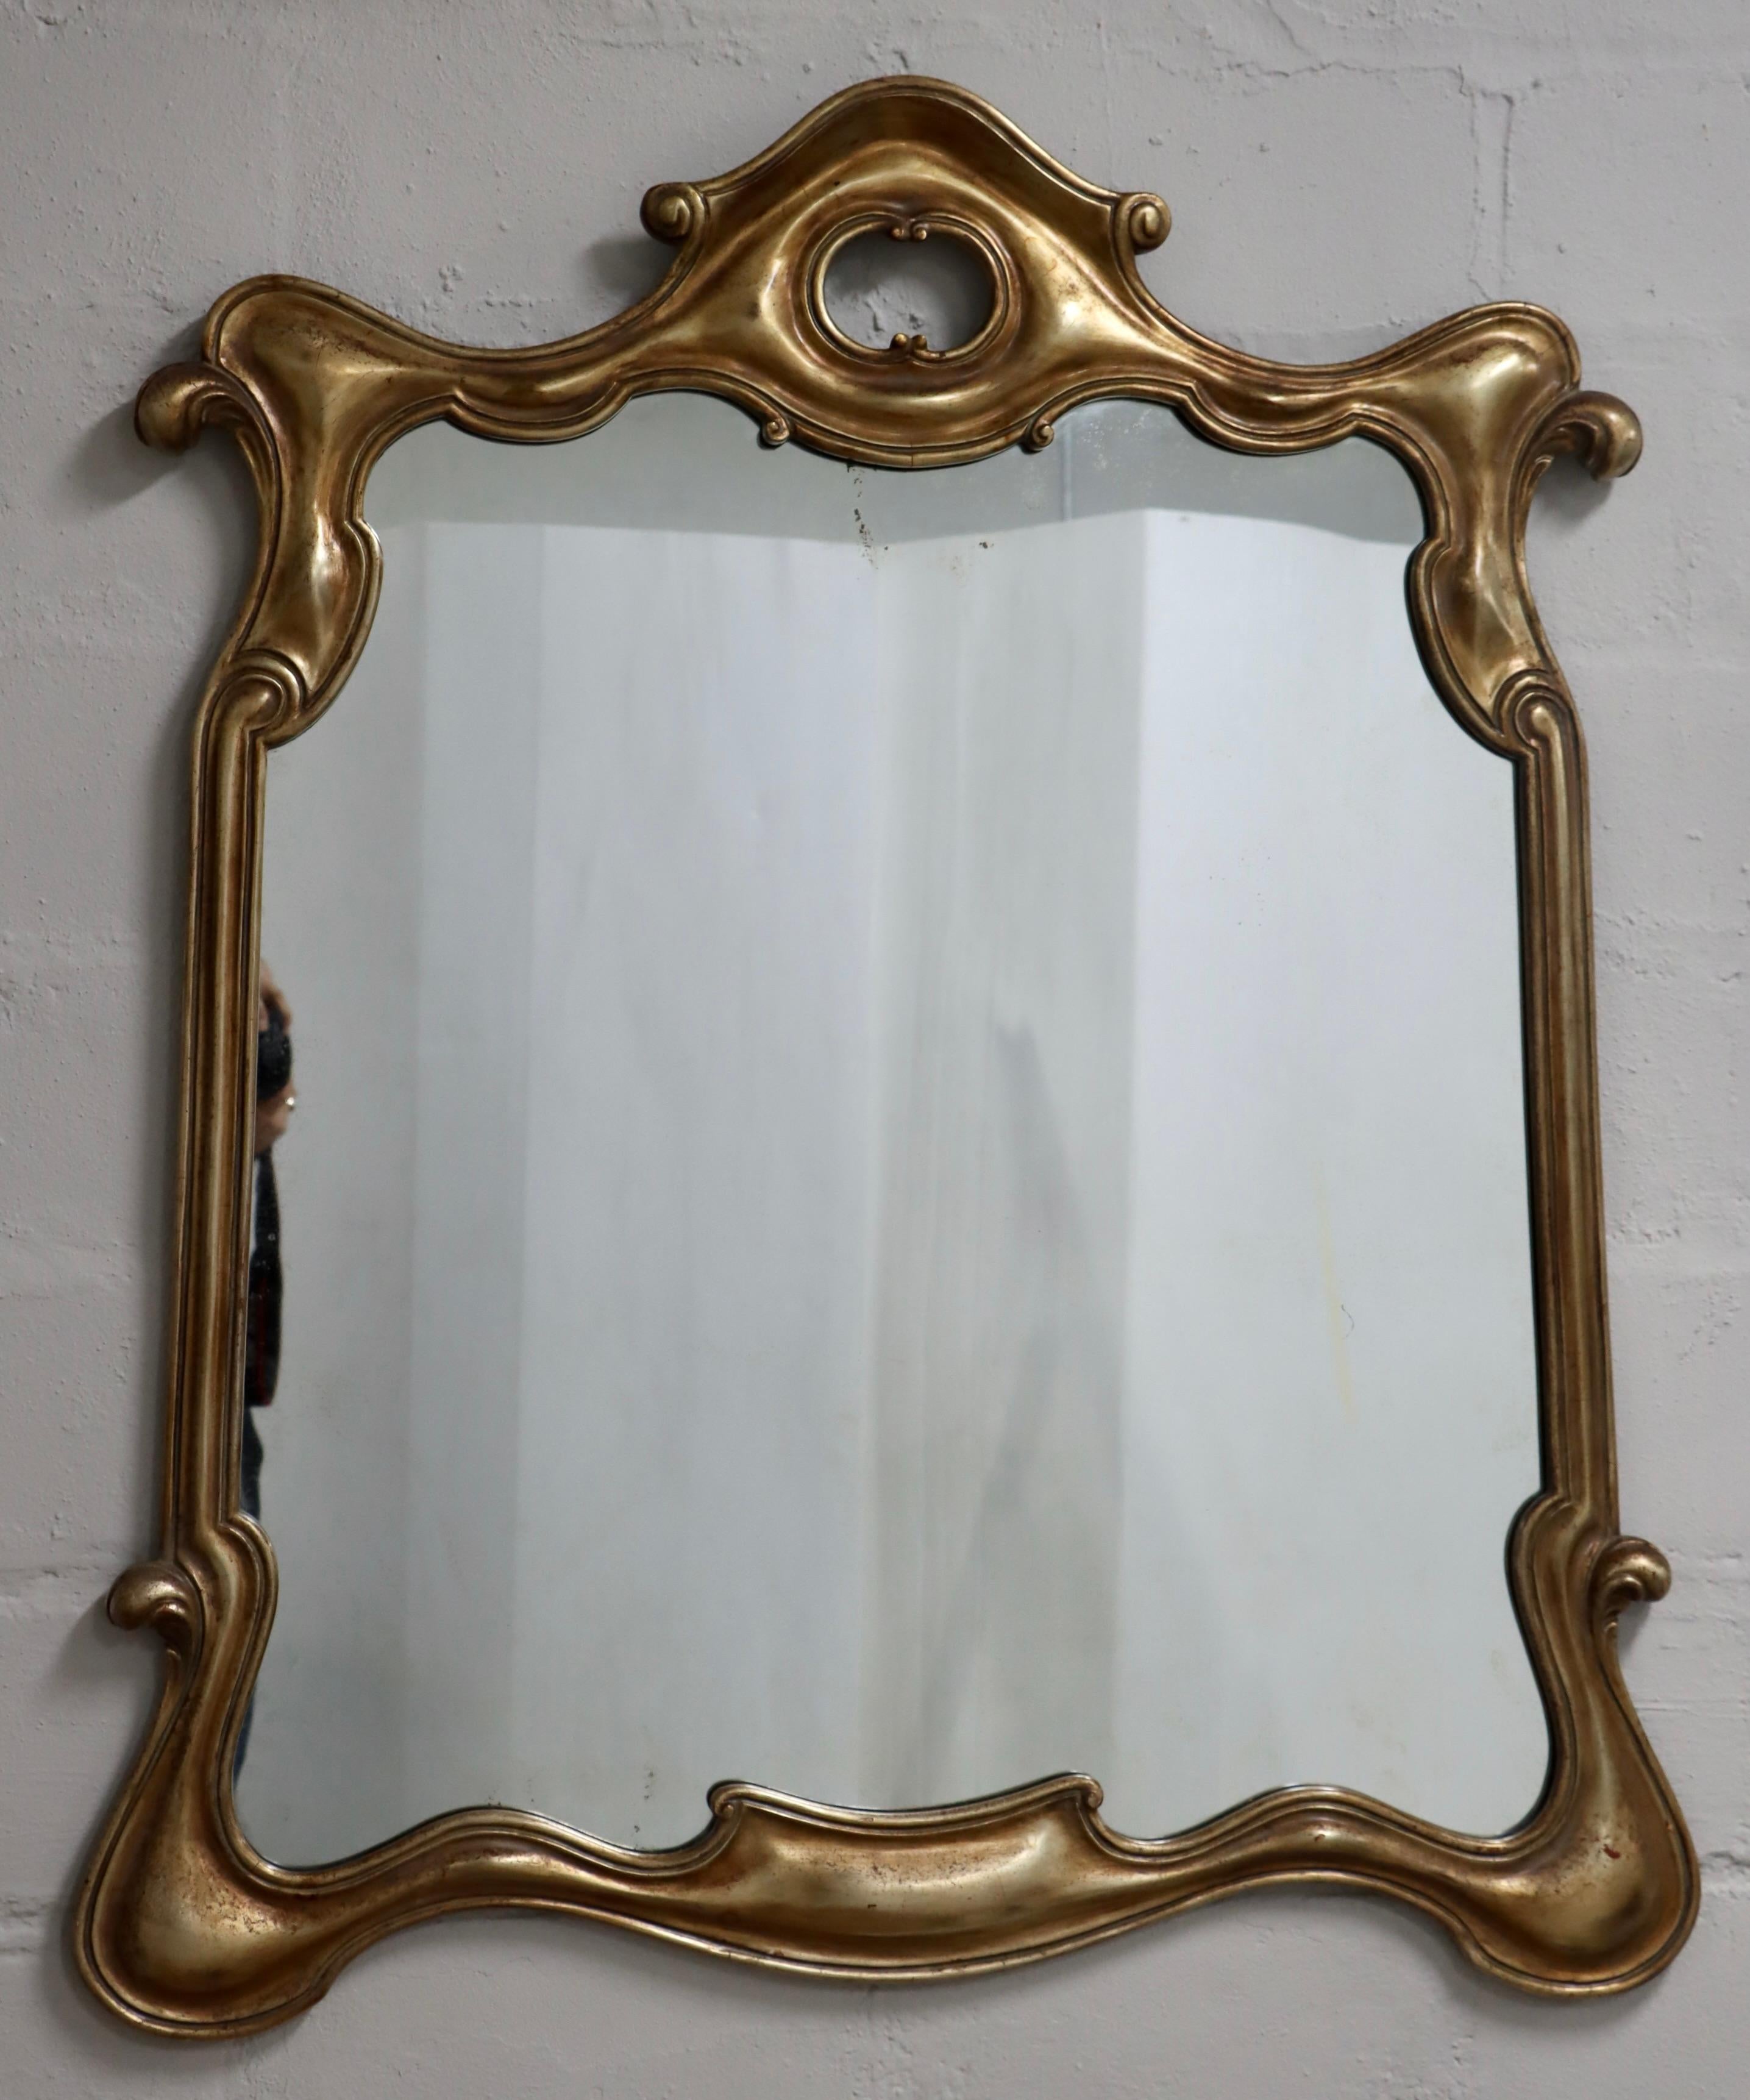 1940's large well made and very heavy sculptural gold and silver leaf Italian wall mirror, in vintage original condition with some wear and patina due to age and use, there is some wear to the frame and patina to the mirror due to age and use.